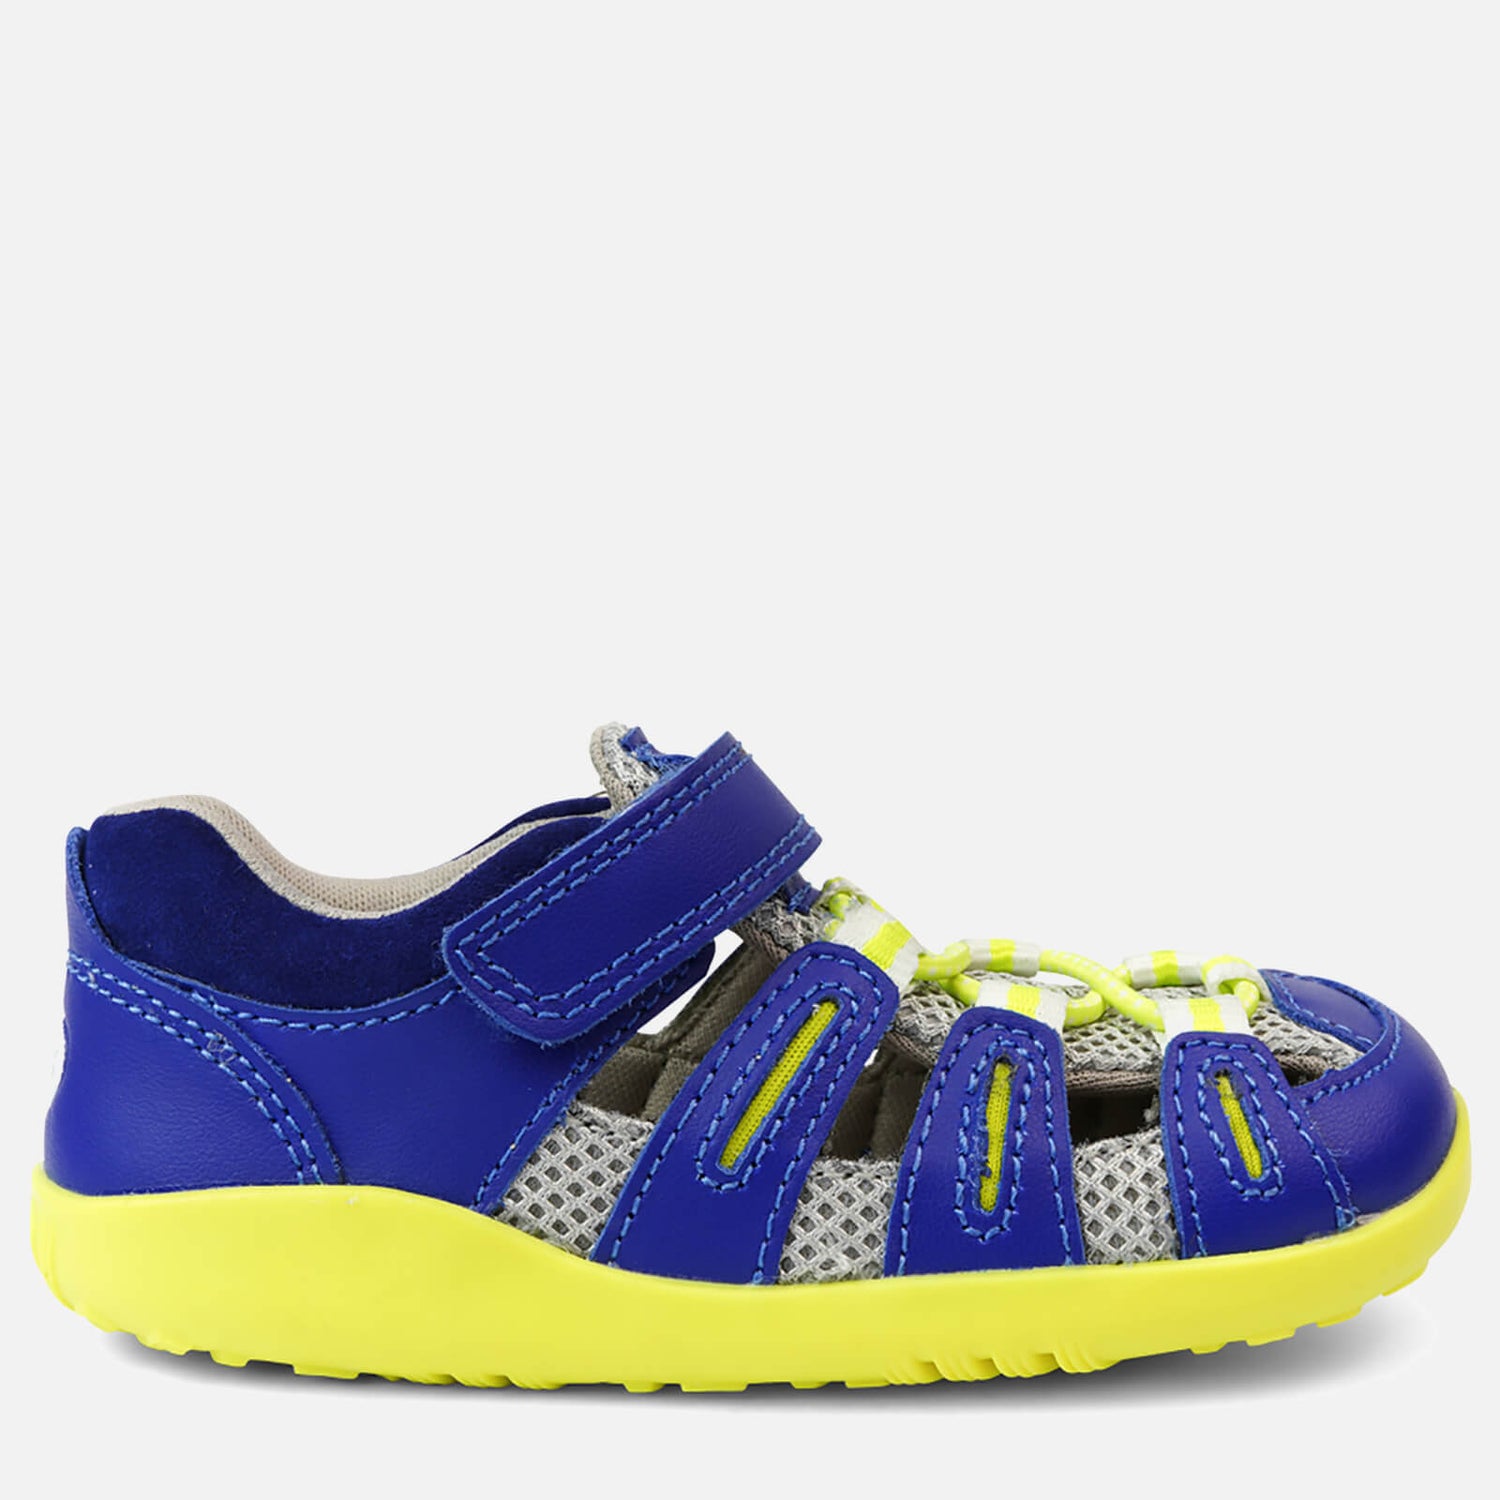 Bobux Toddlers' I-Walk Summit Water Shoes - Blueberry Neon